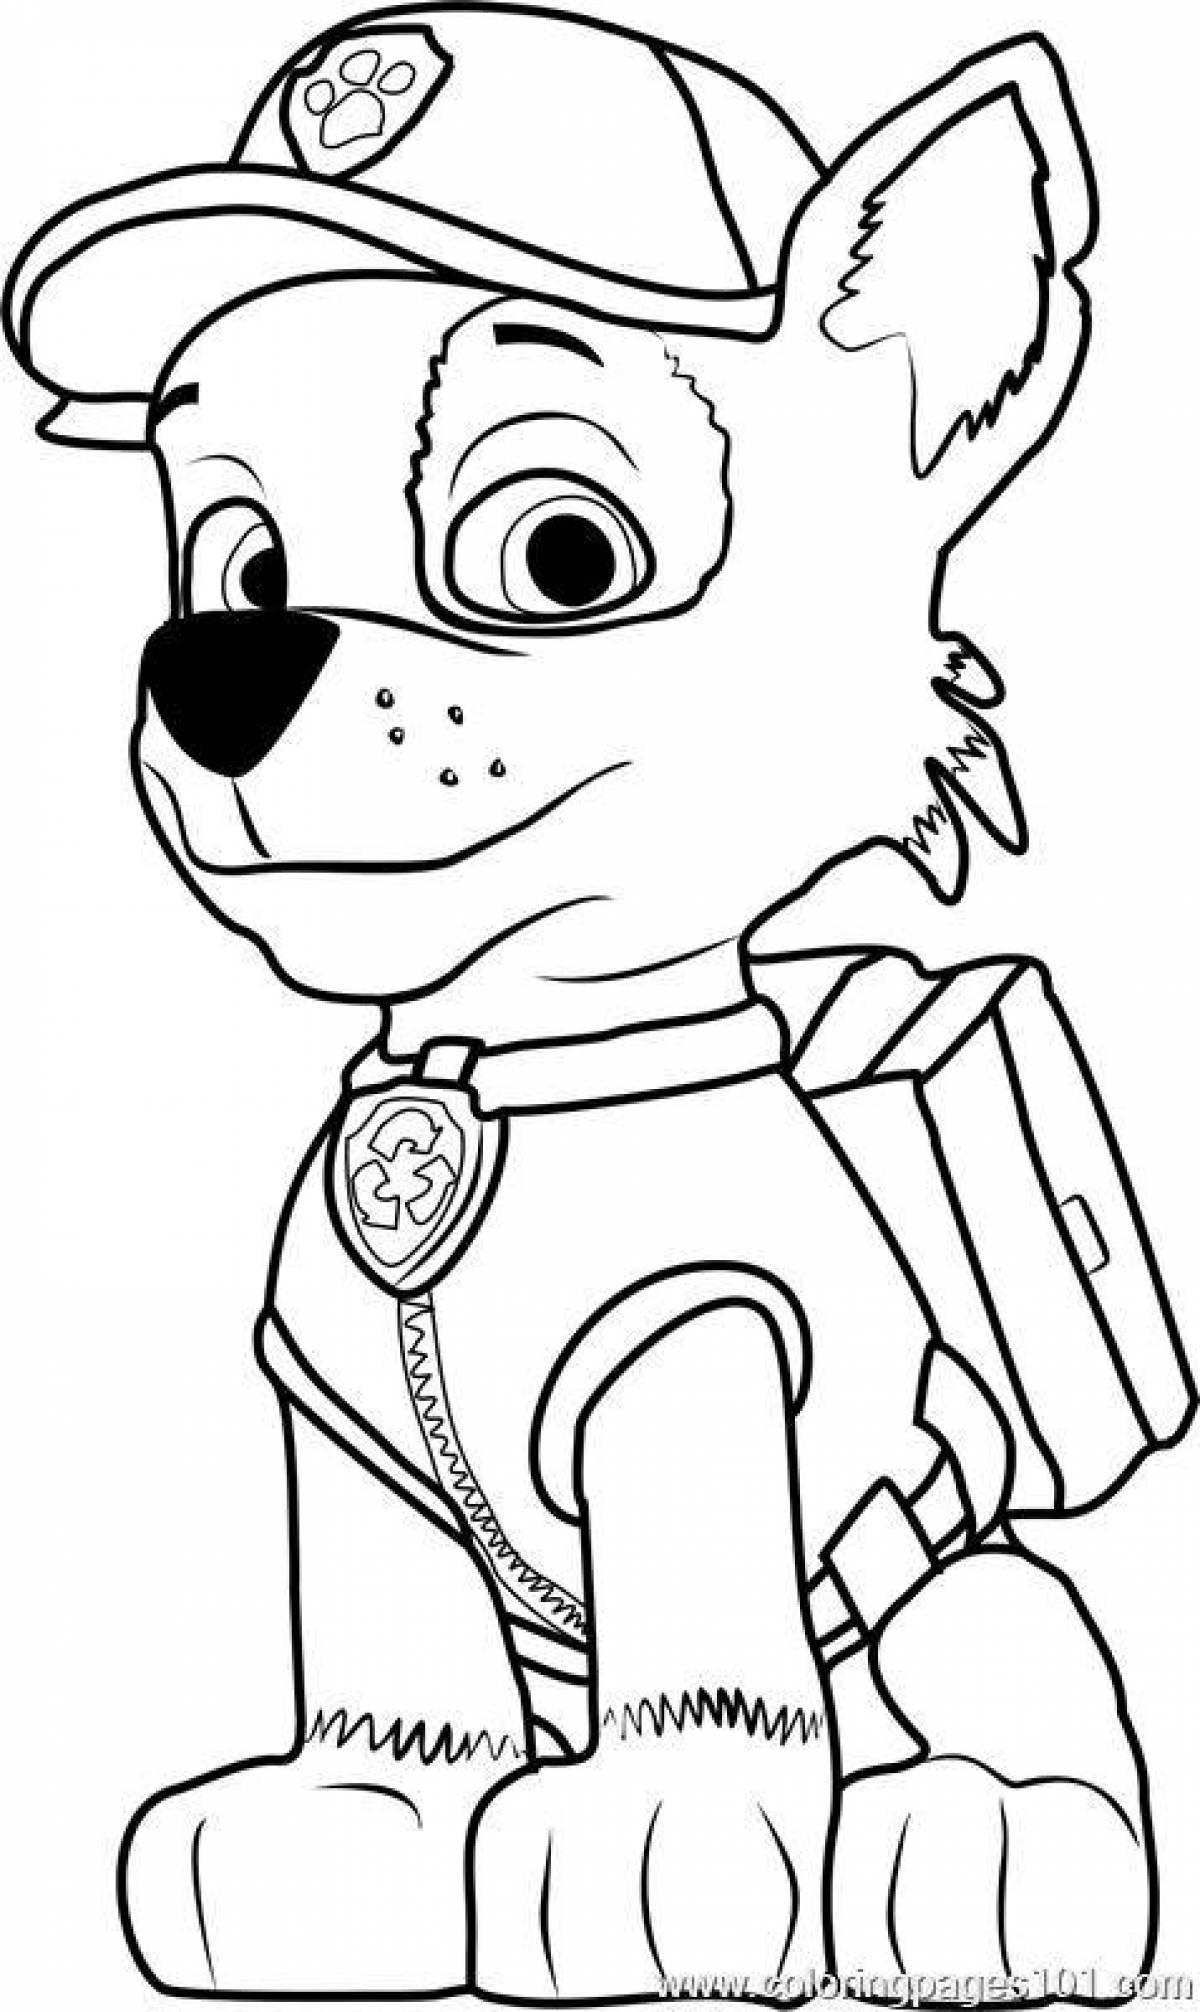 Rocky's funny coloring book